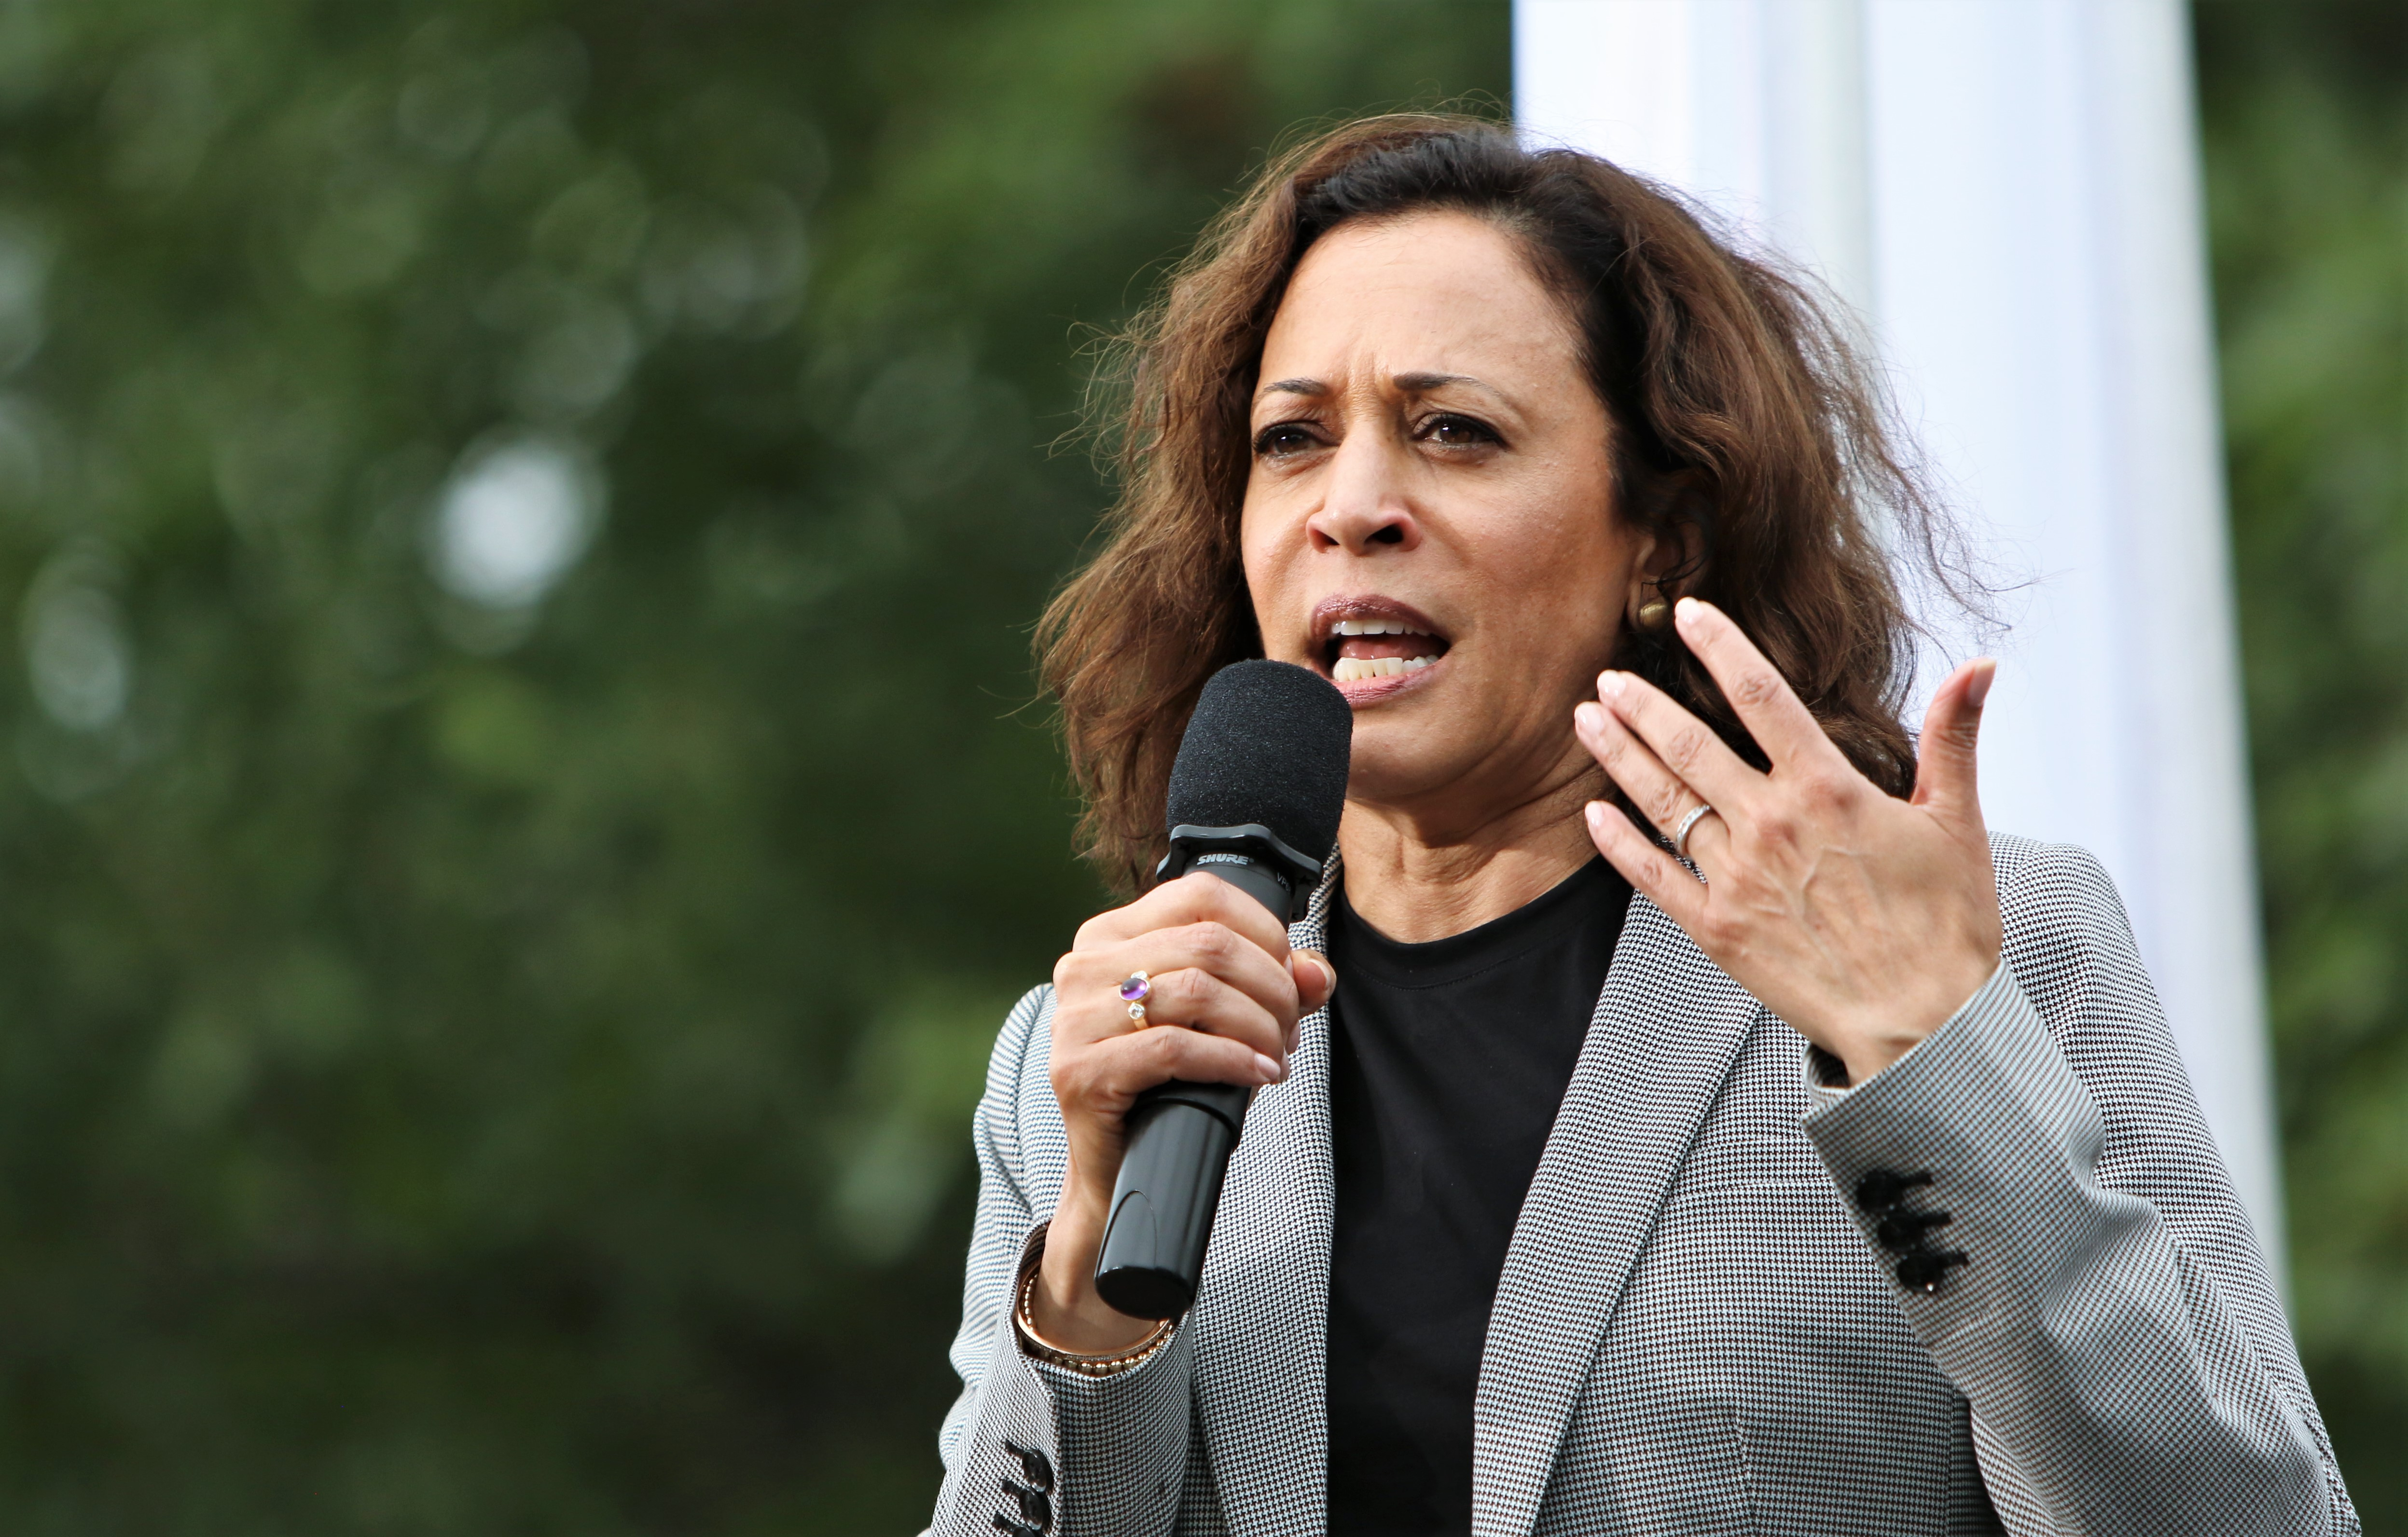 Joe “Did It” These Midterm Elections, at Least According to Kamala